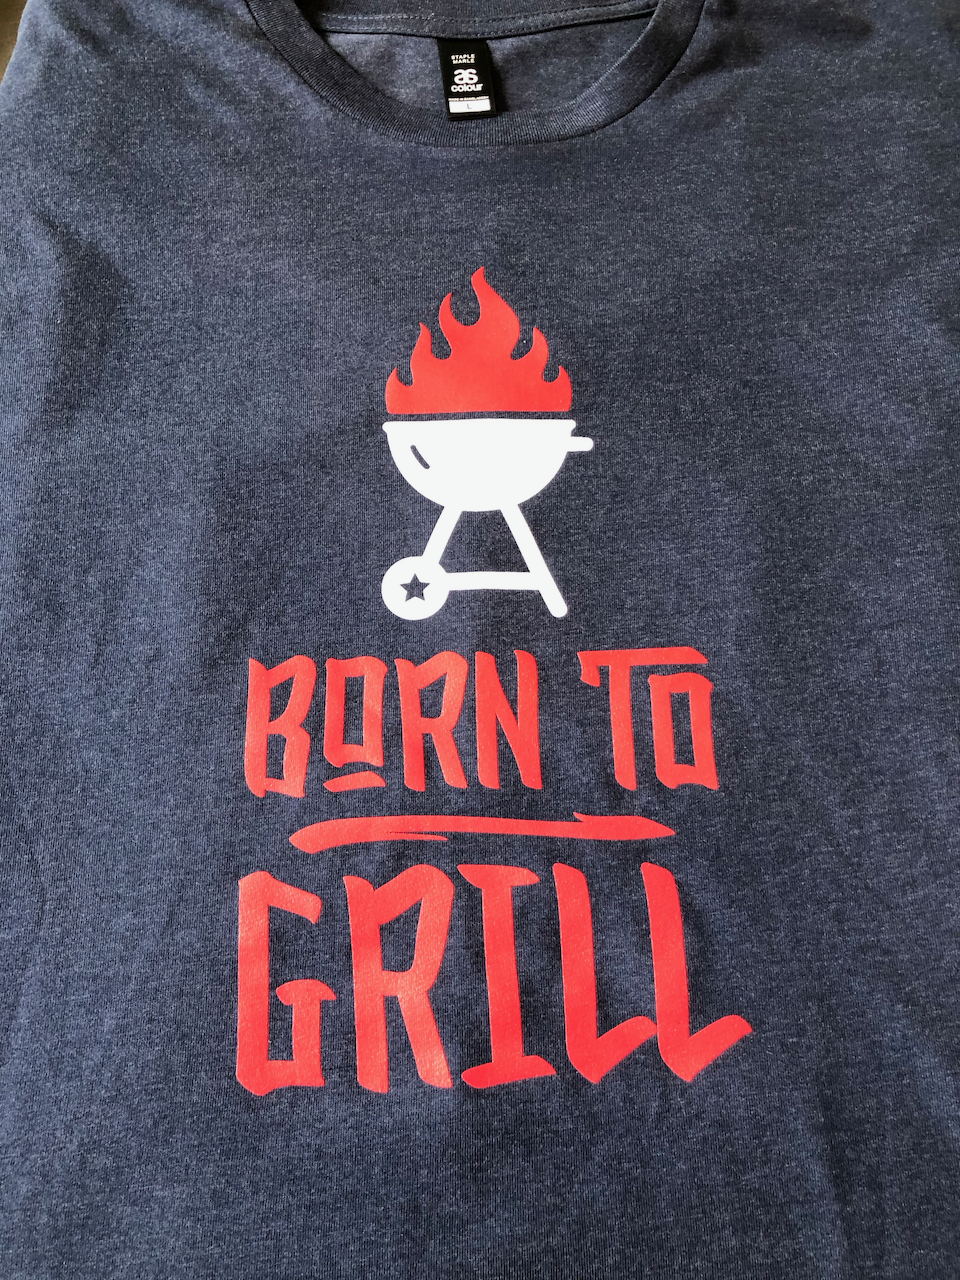 Born To Grill Kettle Shirt